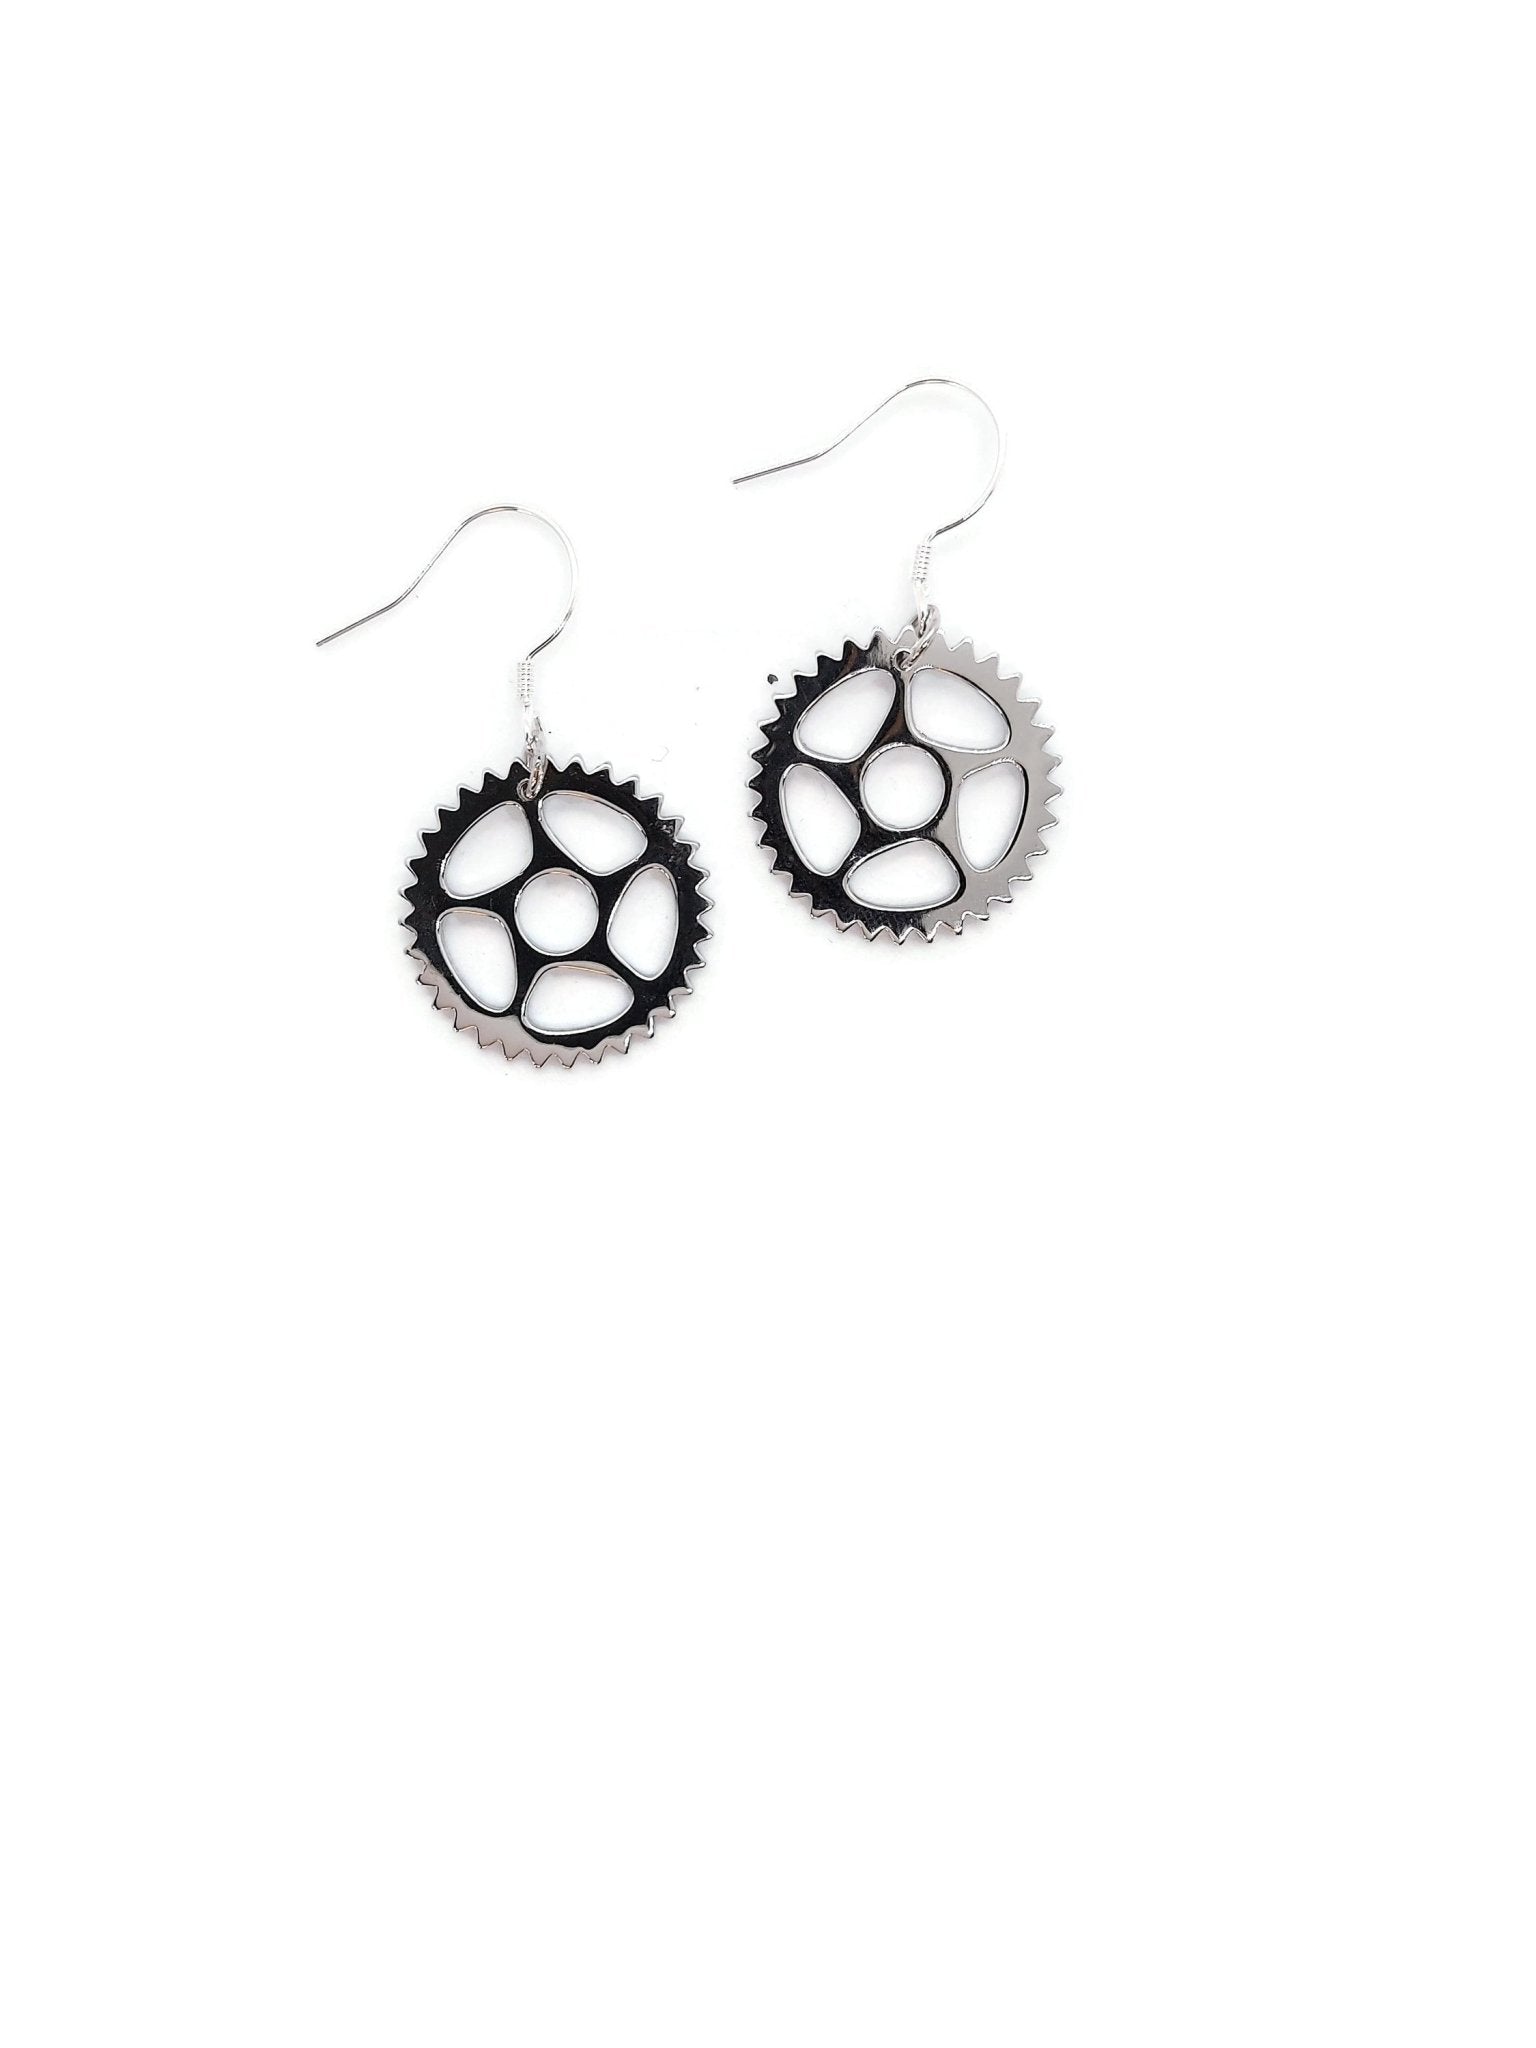 925 Sterling silver bike chain ring design dangle earrings with a white background-2